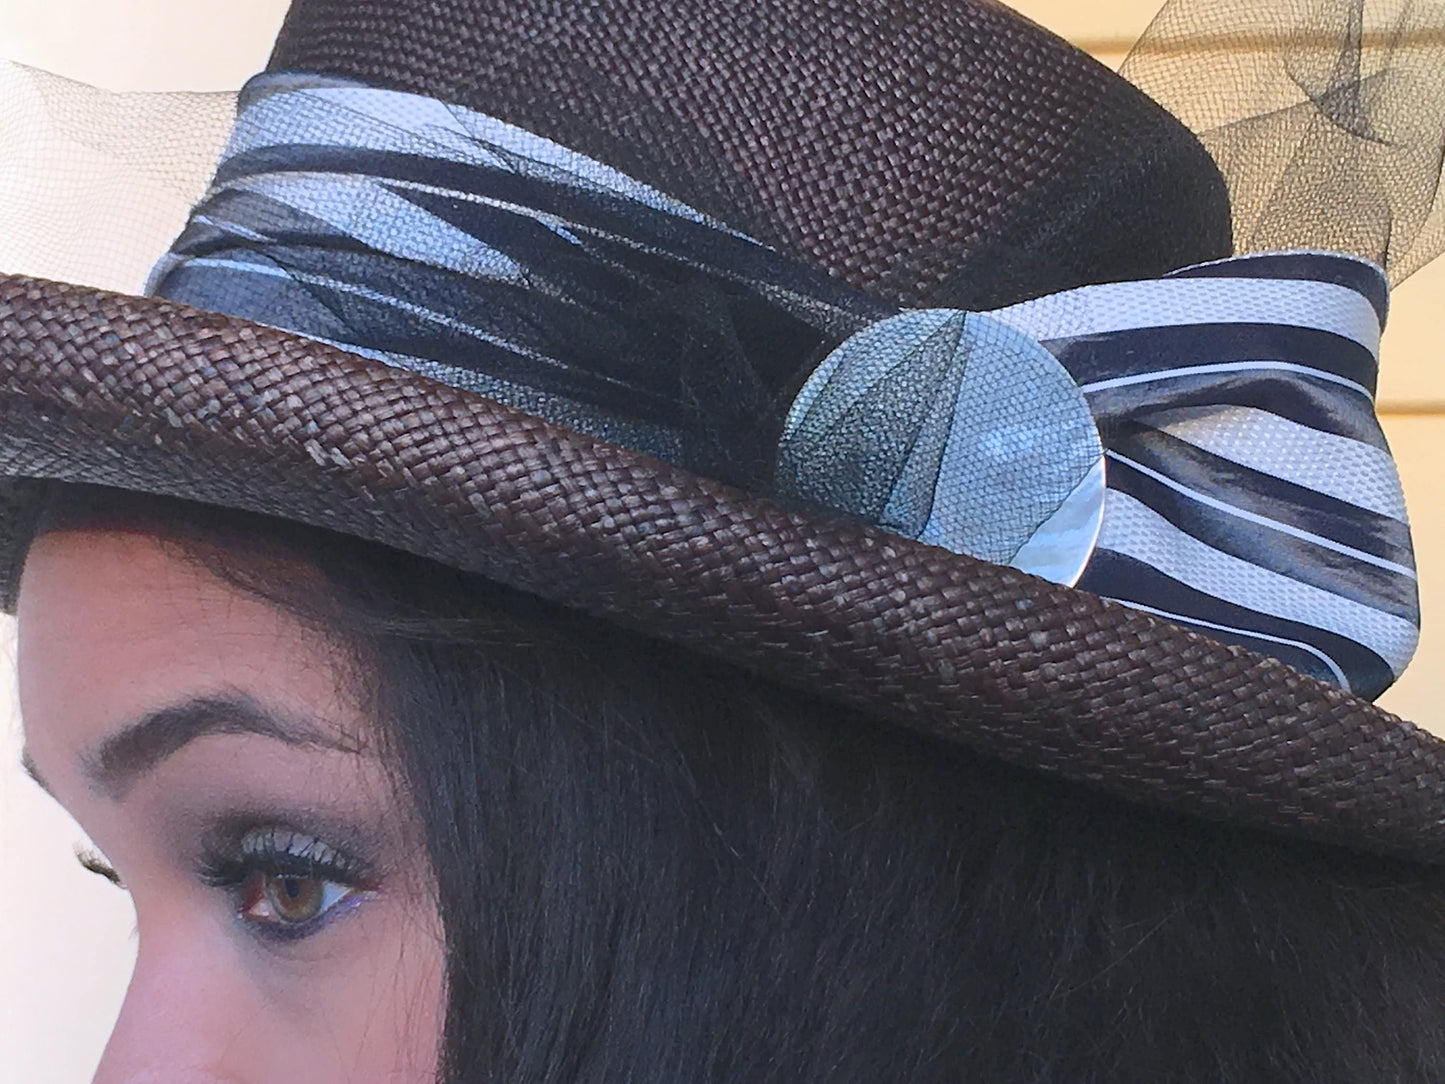 Brown Straw Wide Brimmed Hat-Black trim-Netting-Vintage White and Navy Striped Ribbon-Mother of Pearl Button-Wedding-Sun Hat-Race Track Hat!